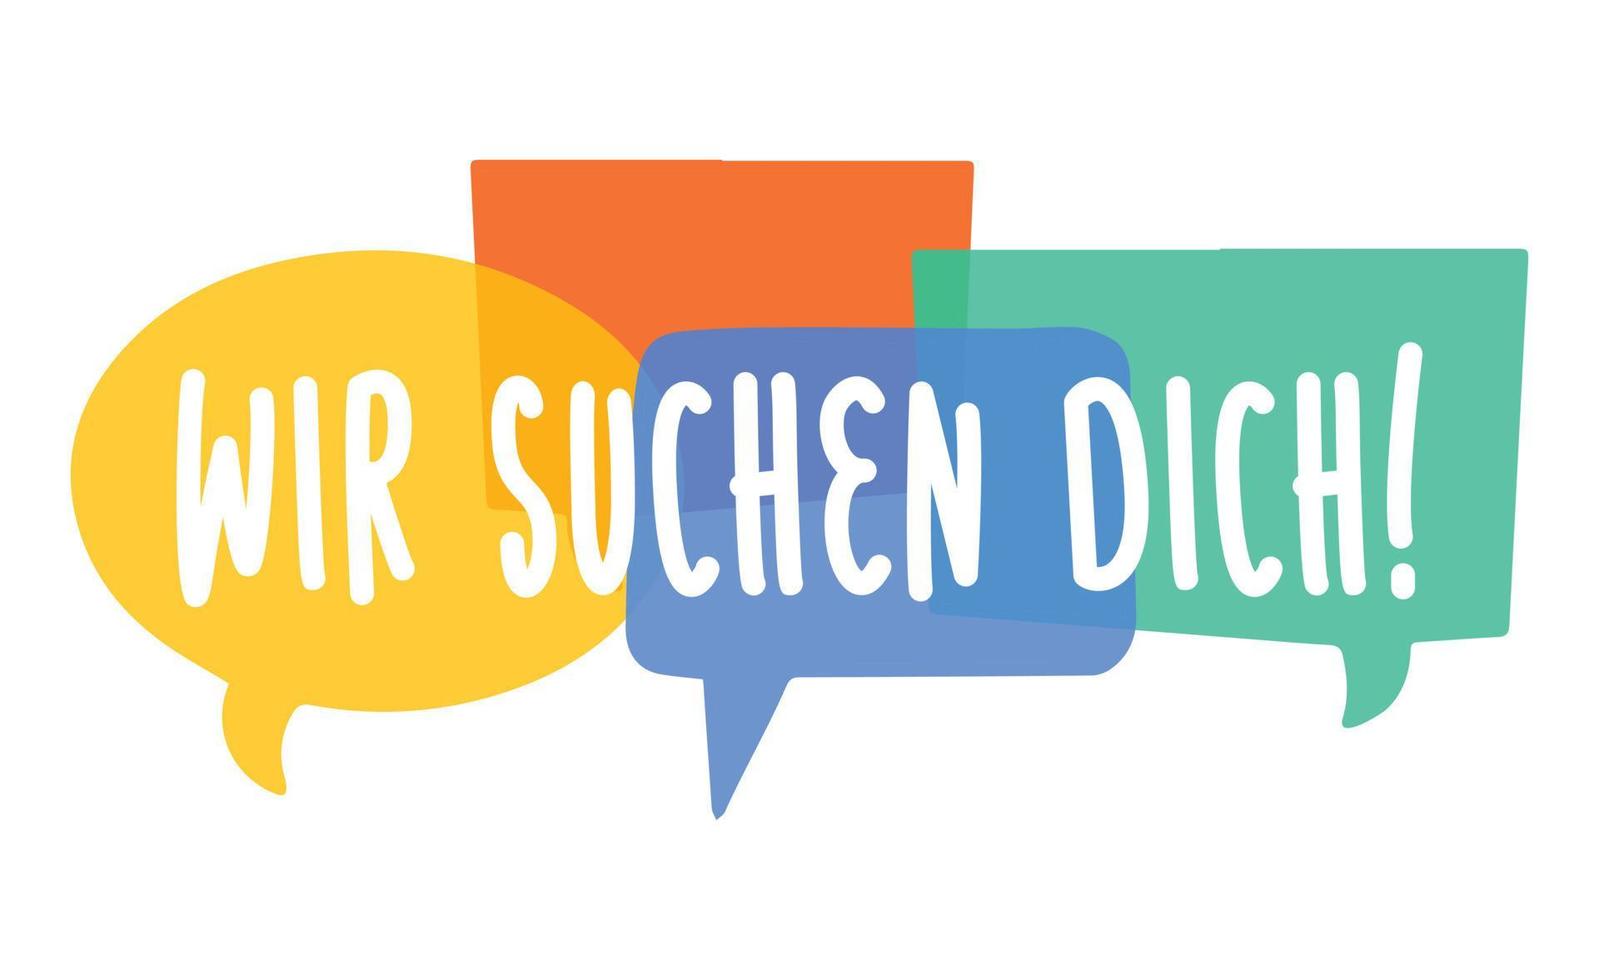 Wir suchen dich - German translation - we are looking for you. Hiring recruitment poster vector design with bright speech bubbles. Vacancy template. Job opening, search.